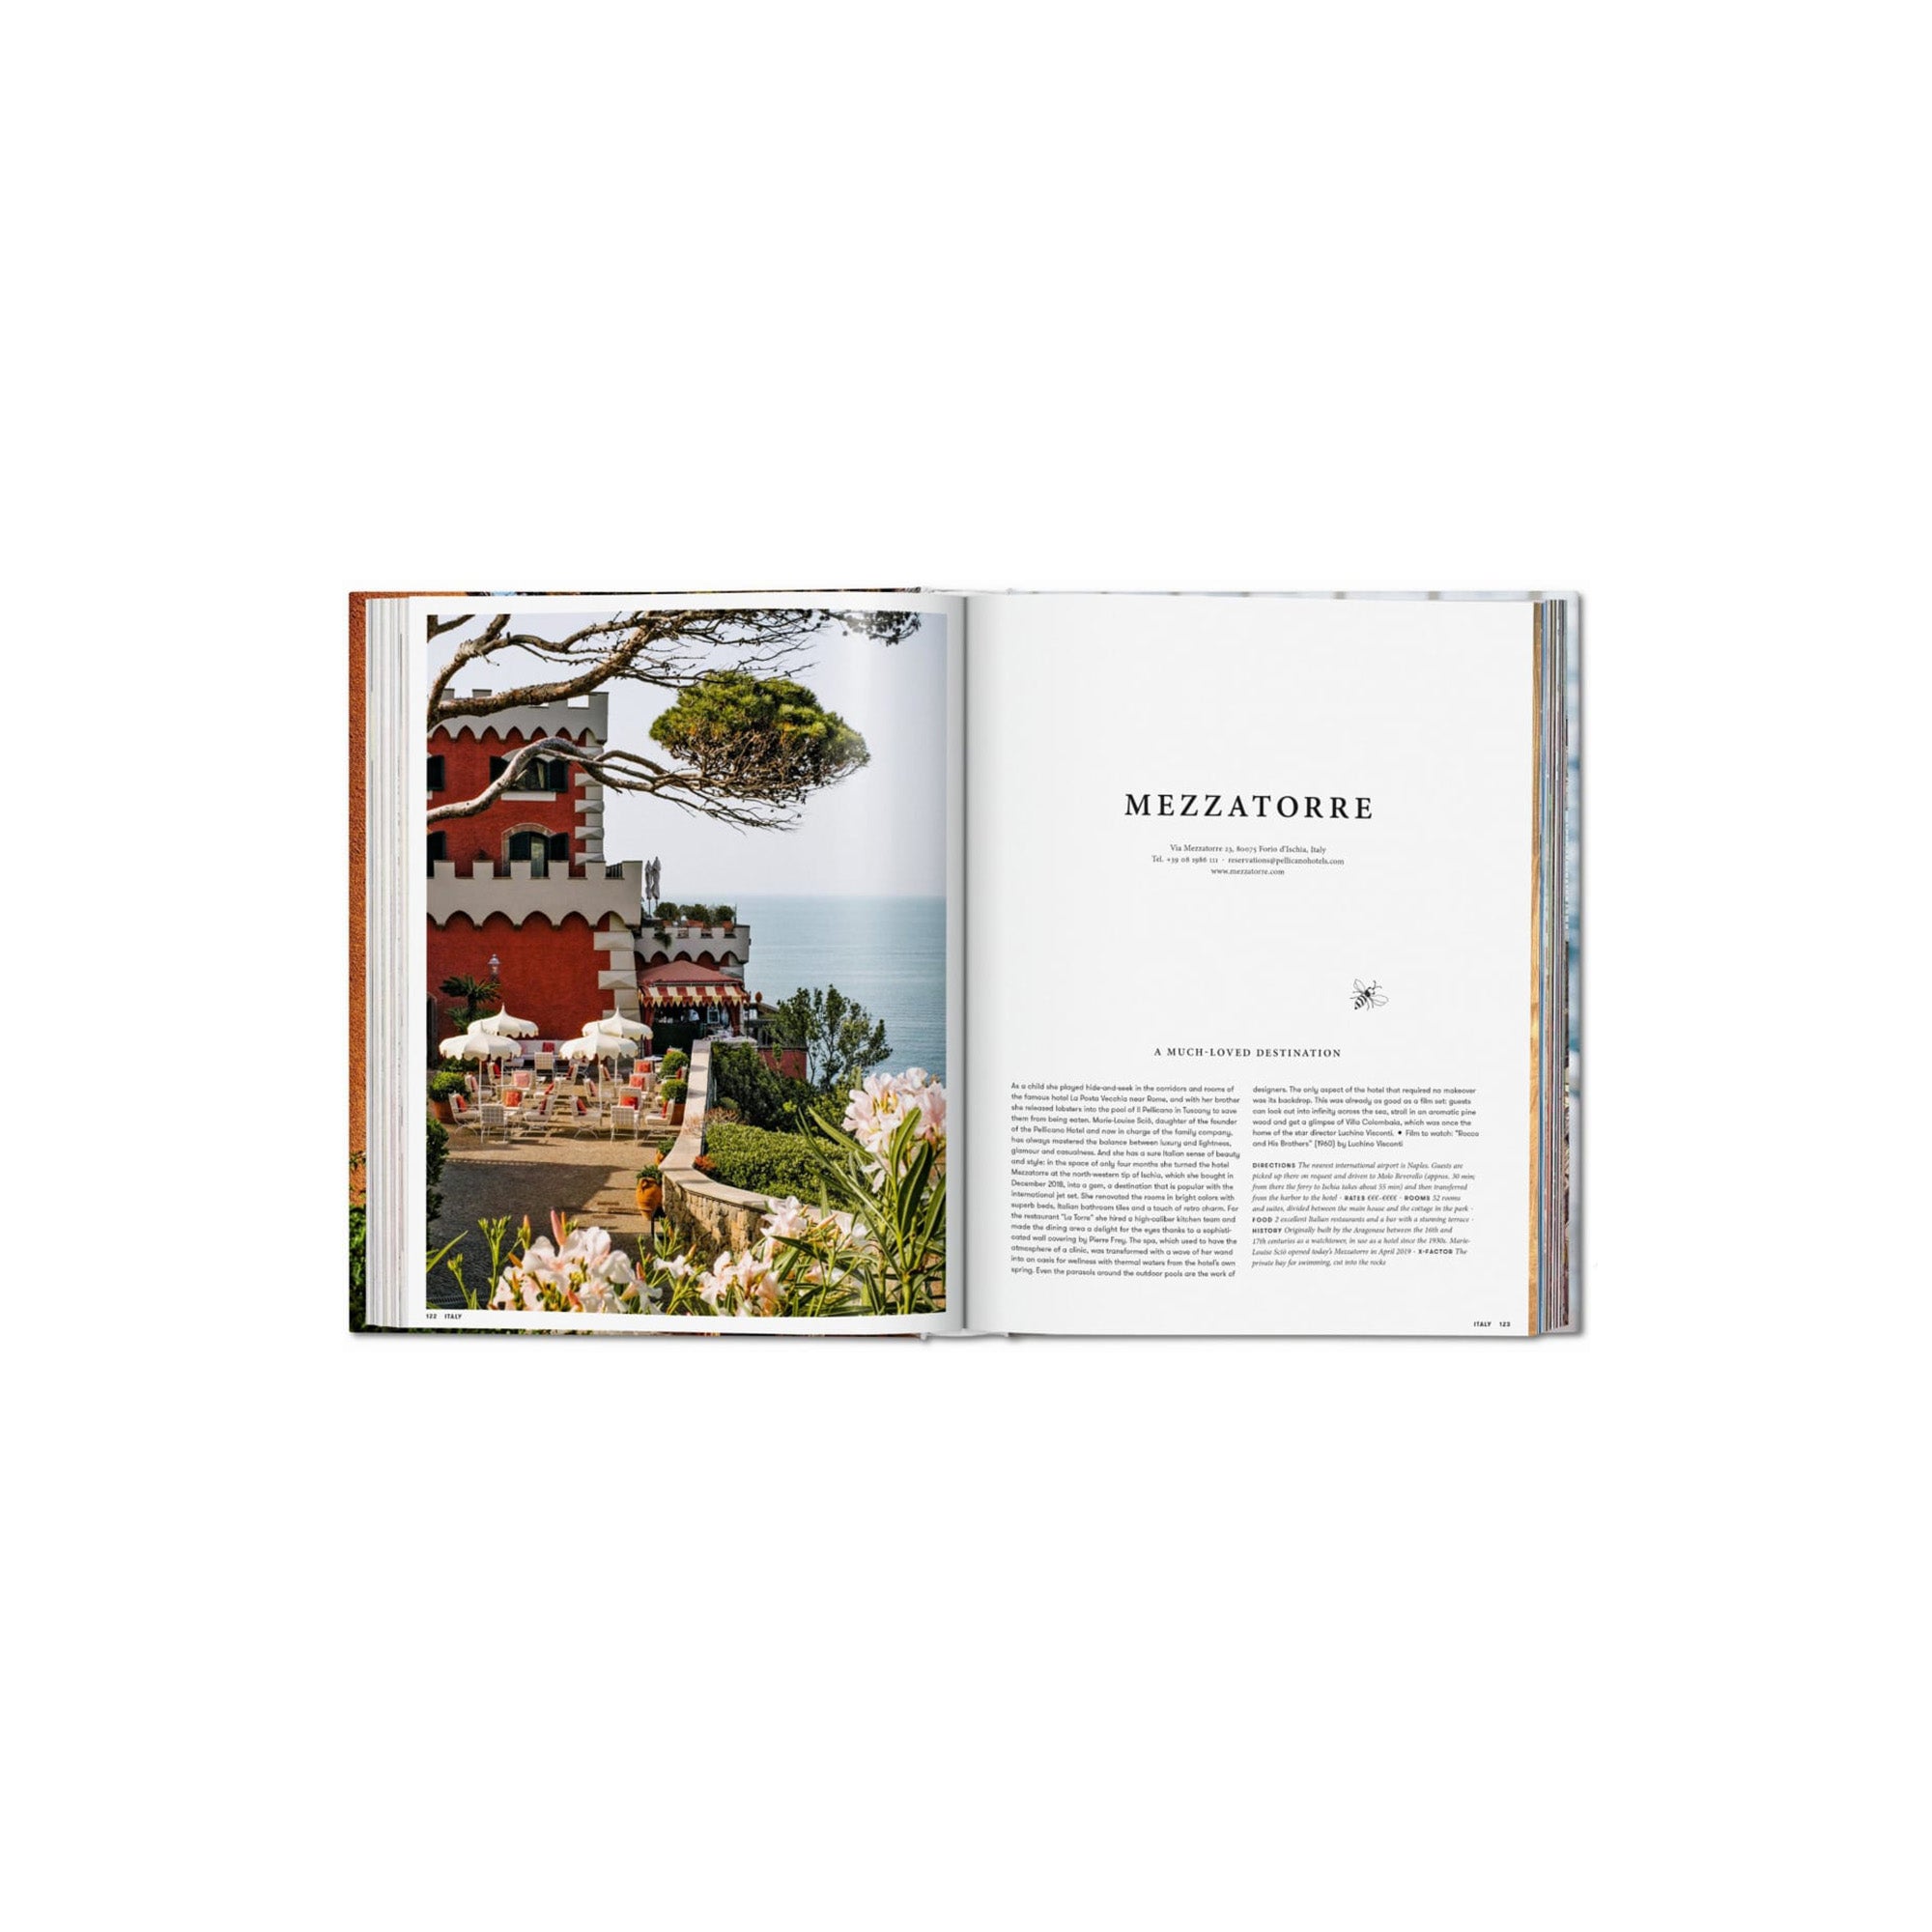 Great Escapes Mediterranean. The Hotel Book - Hardcover